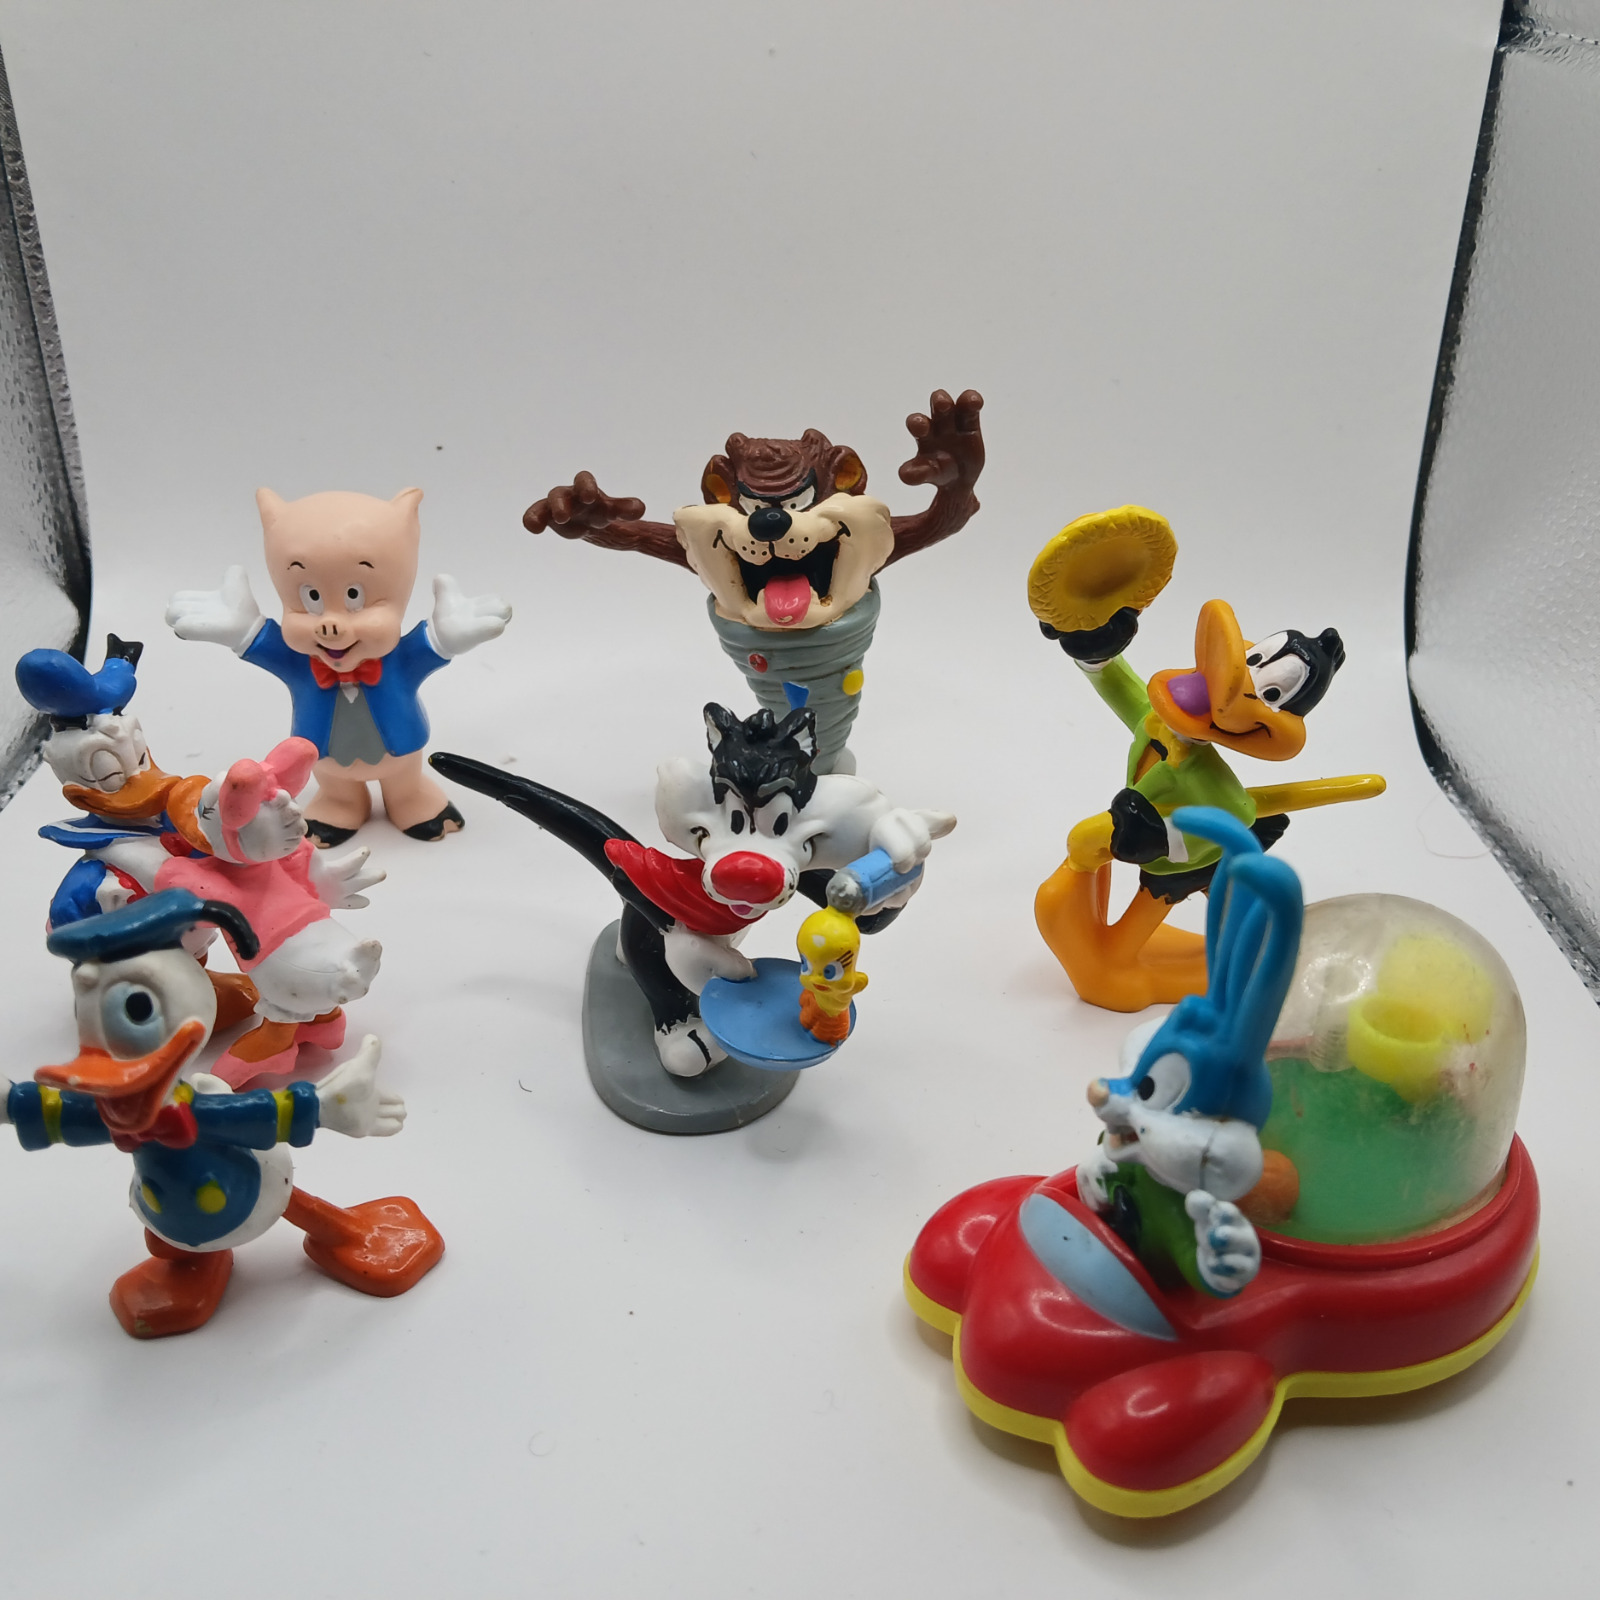 Vintage Looney Tunes Figures Lot of 6 - Preowned Nostalgia